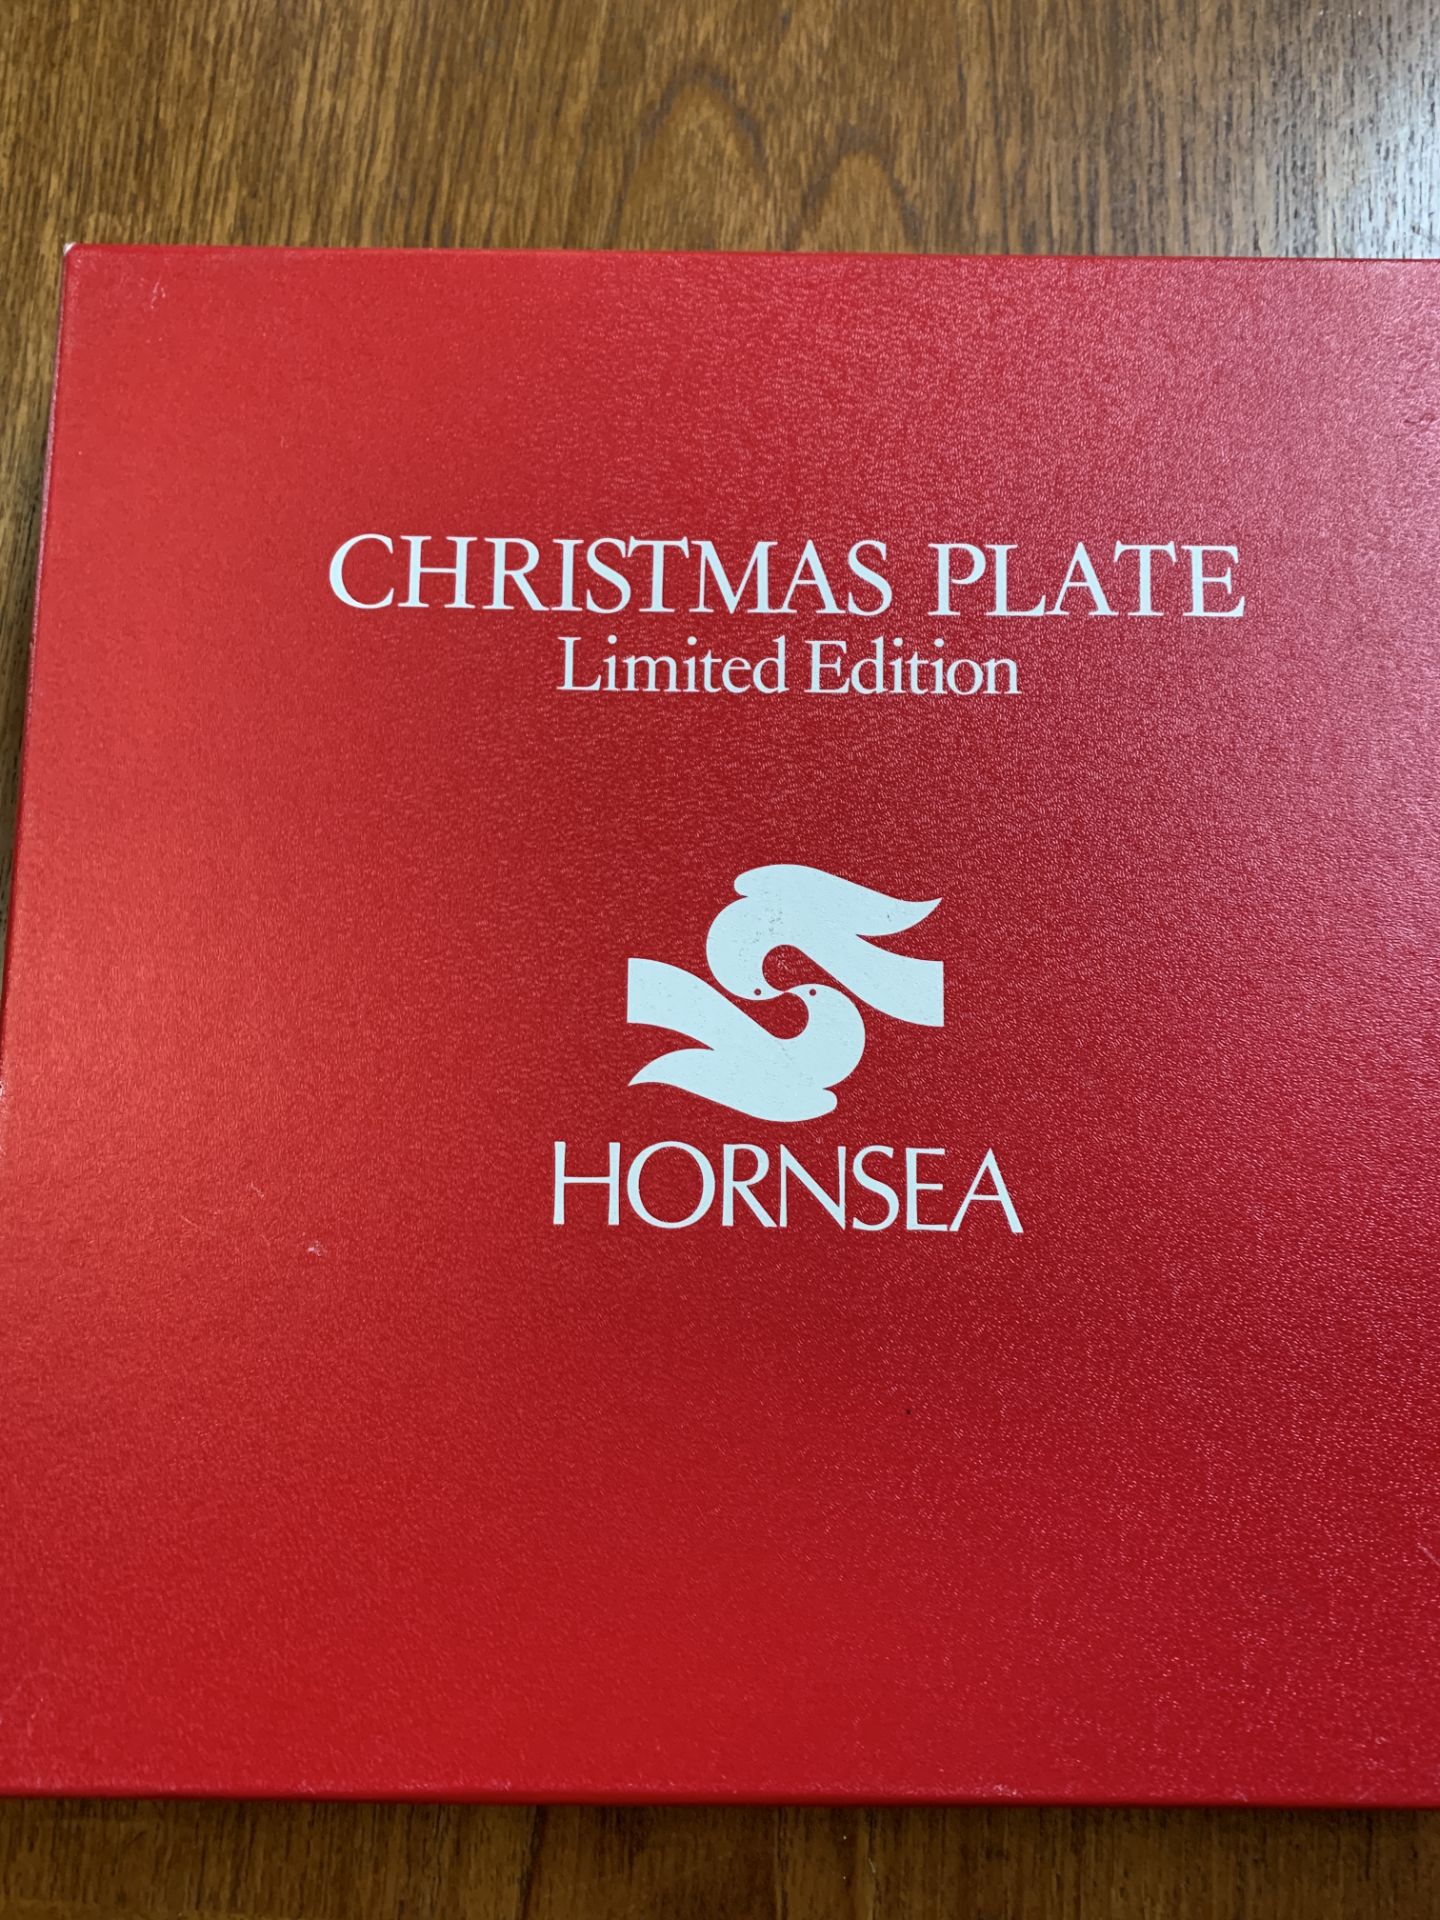 Complete set of nine Hornsea Limited Edition Christmas Plates. - Image 4 of 5